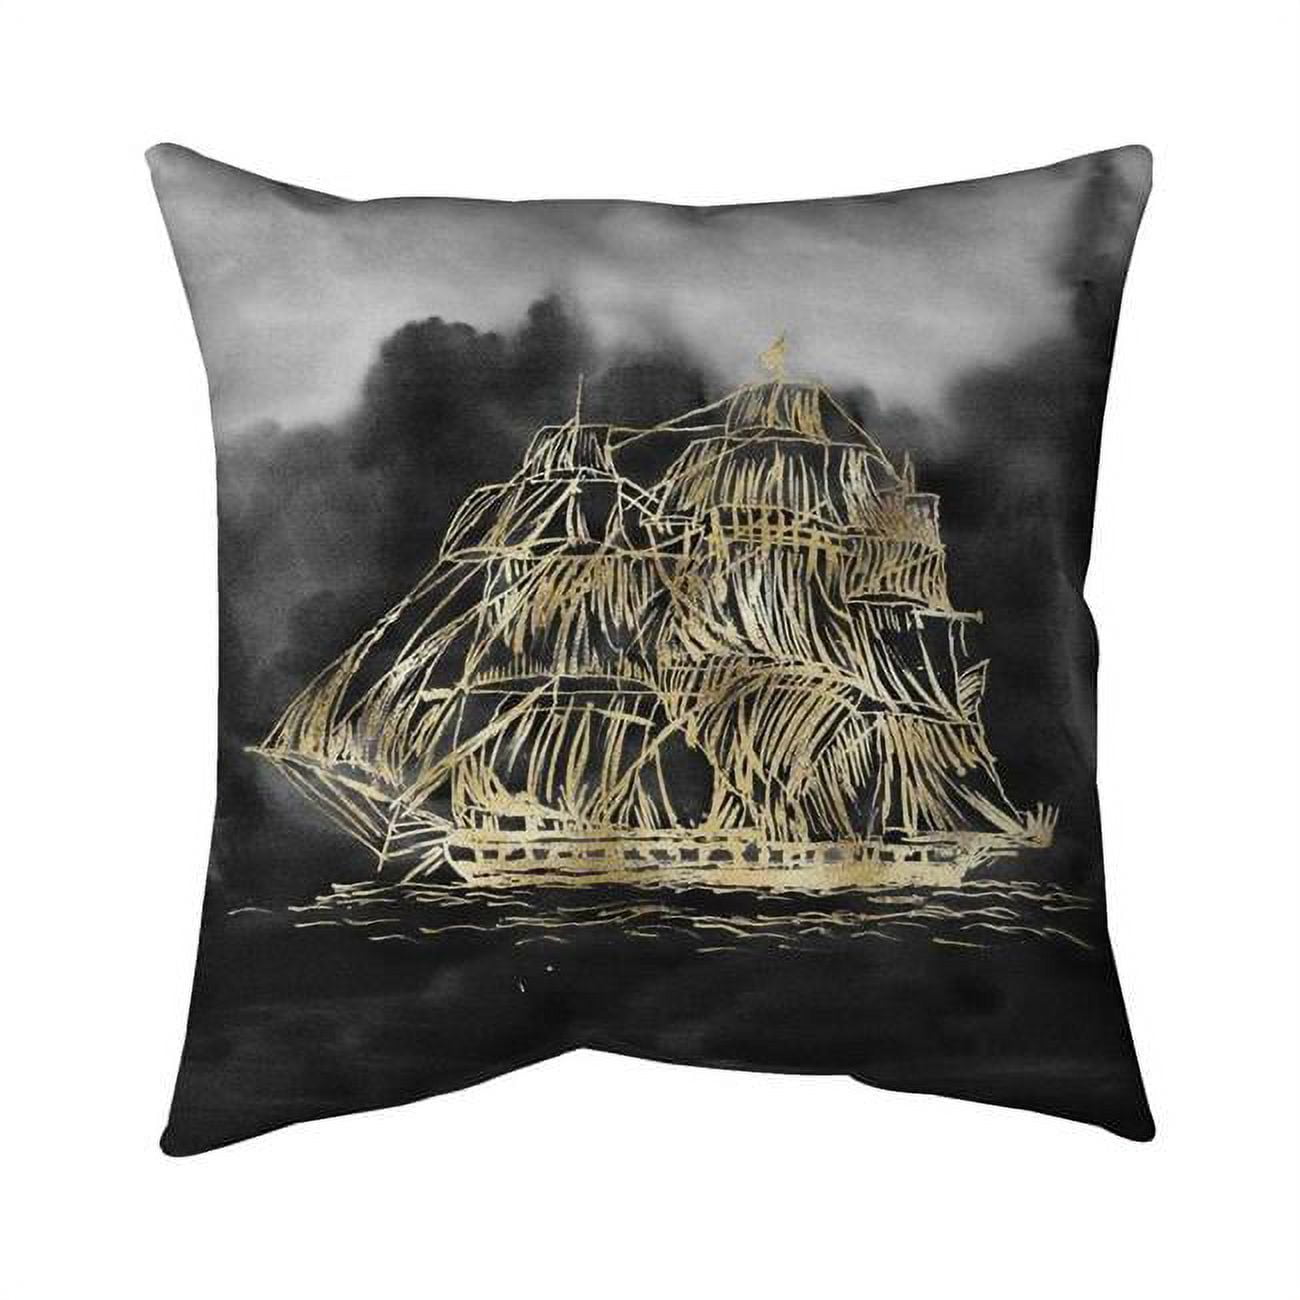 Fondo 18 x 18 in. Illustration of A Old Sailing Ship-Double Sided Print Indoor Pillow Cover